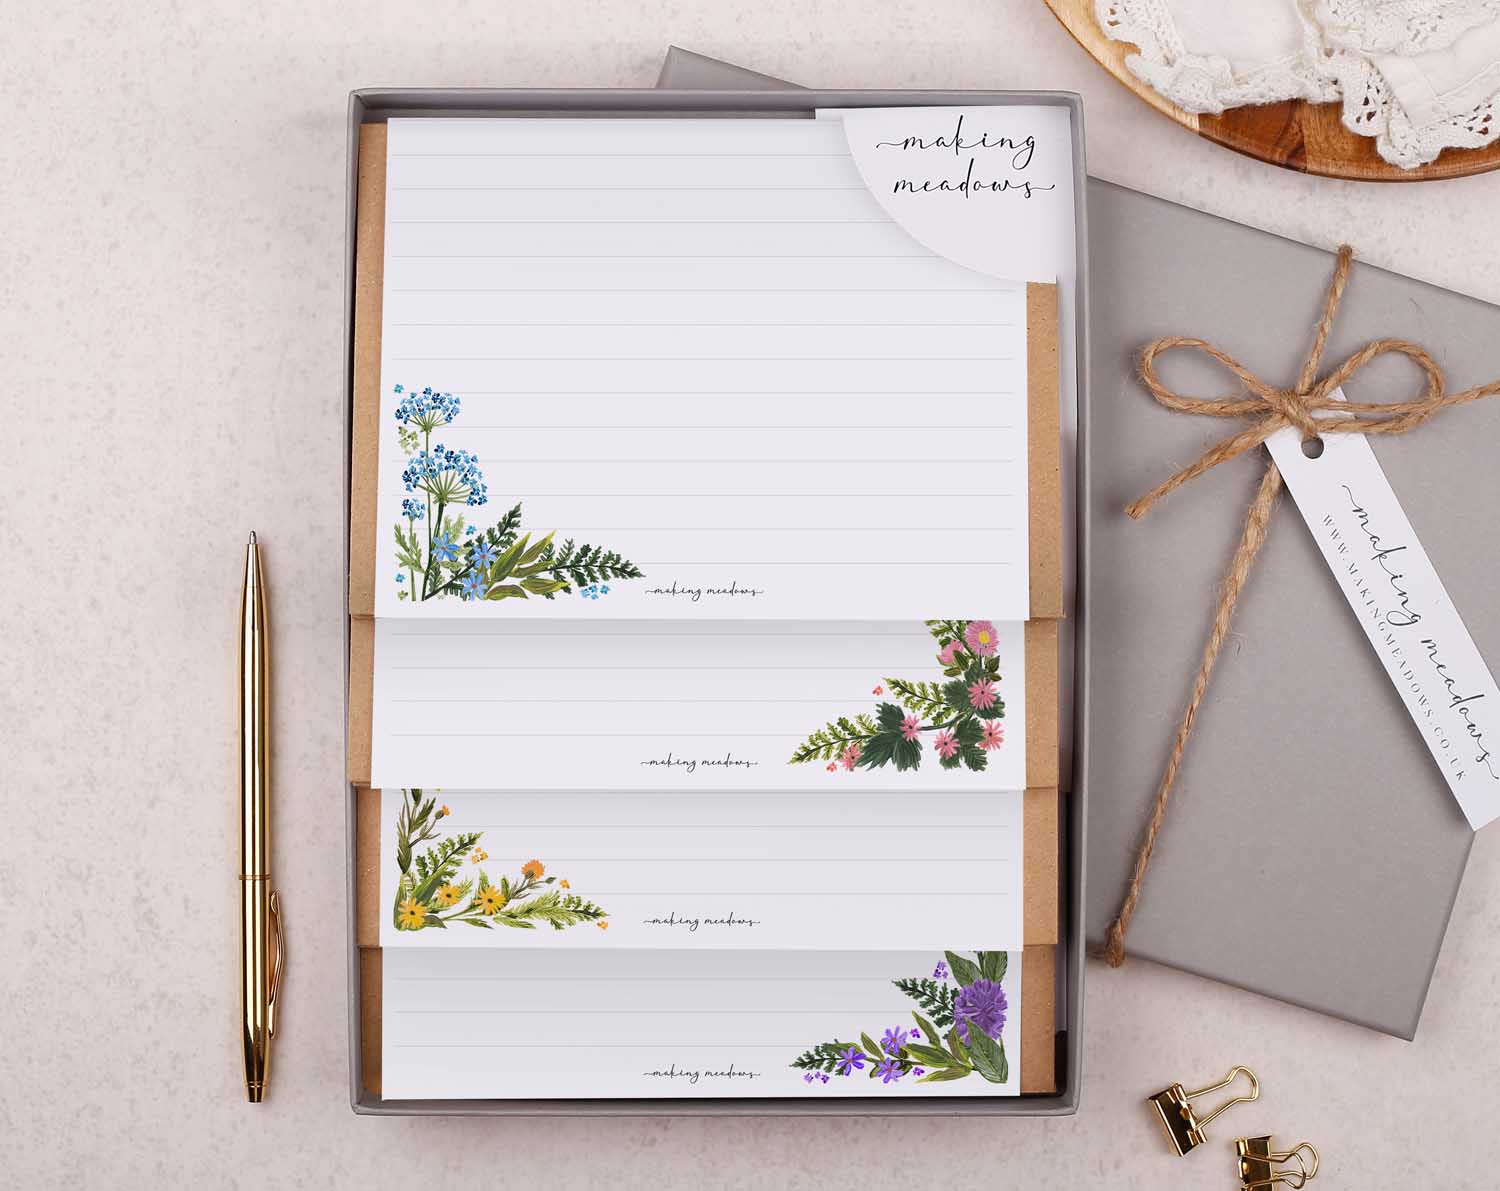 32 sheets of wild flowers design writing paper in a gift box set.